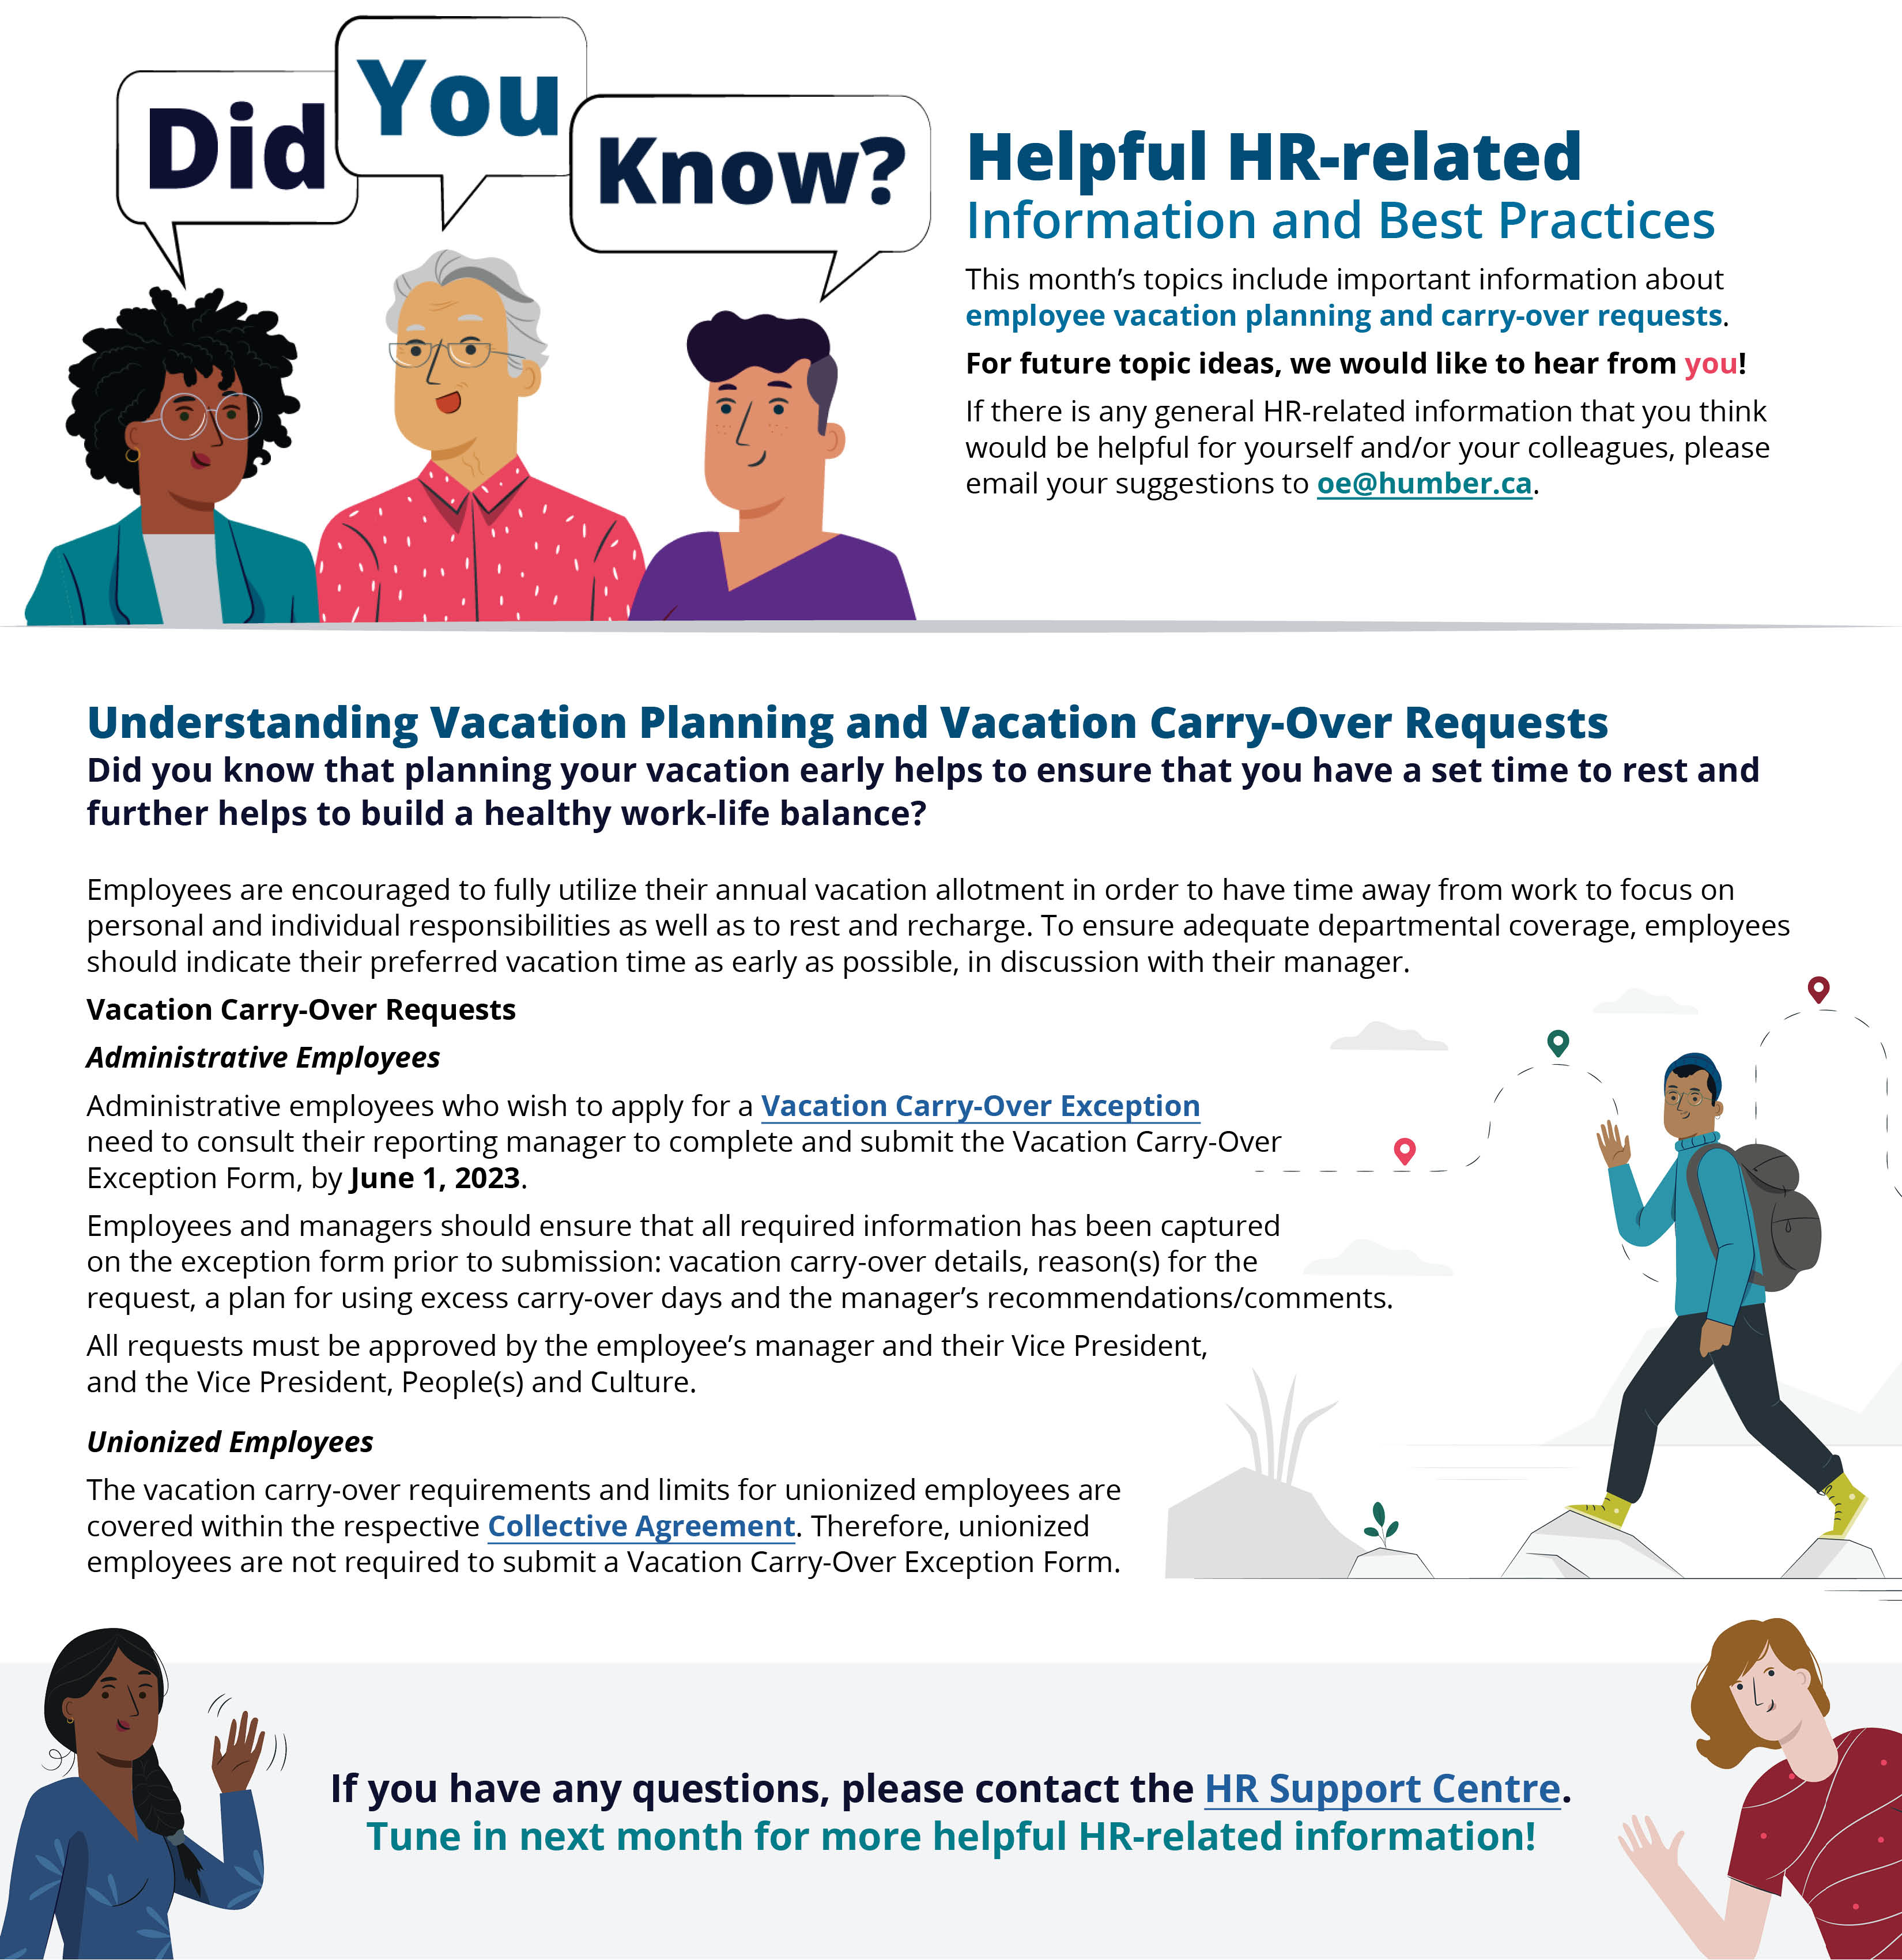 "Did you know? Helpful HR-related information and best practices" poster